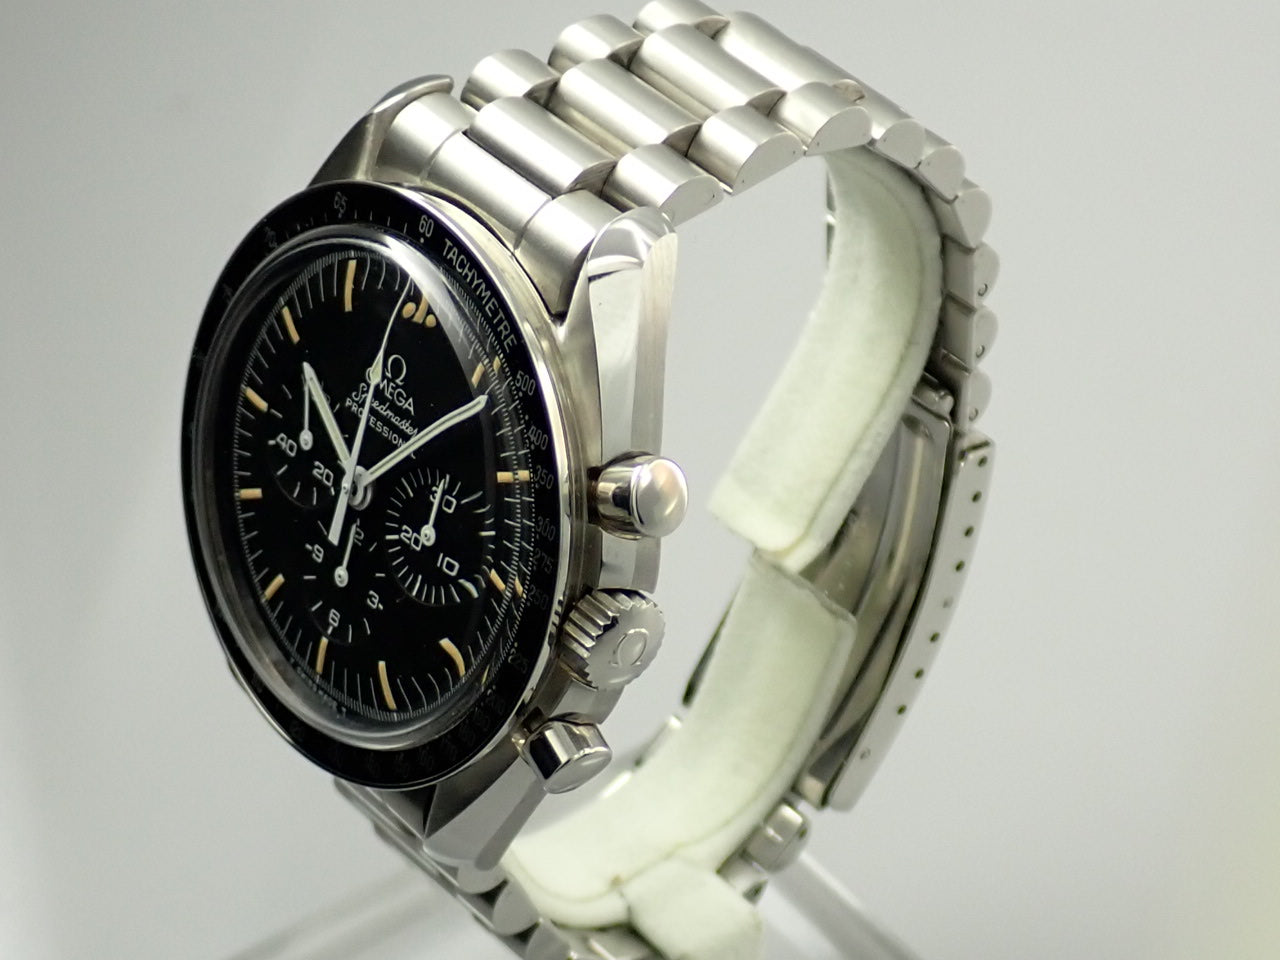 Omega Speedmaster Professional Apollo 11 20th Anniversary [Good Condition] &lt;Warranty Box and Others&gt;